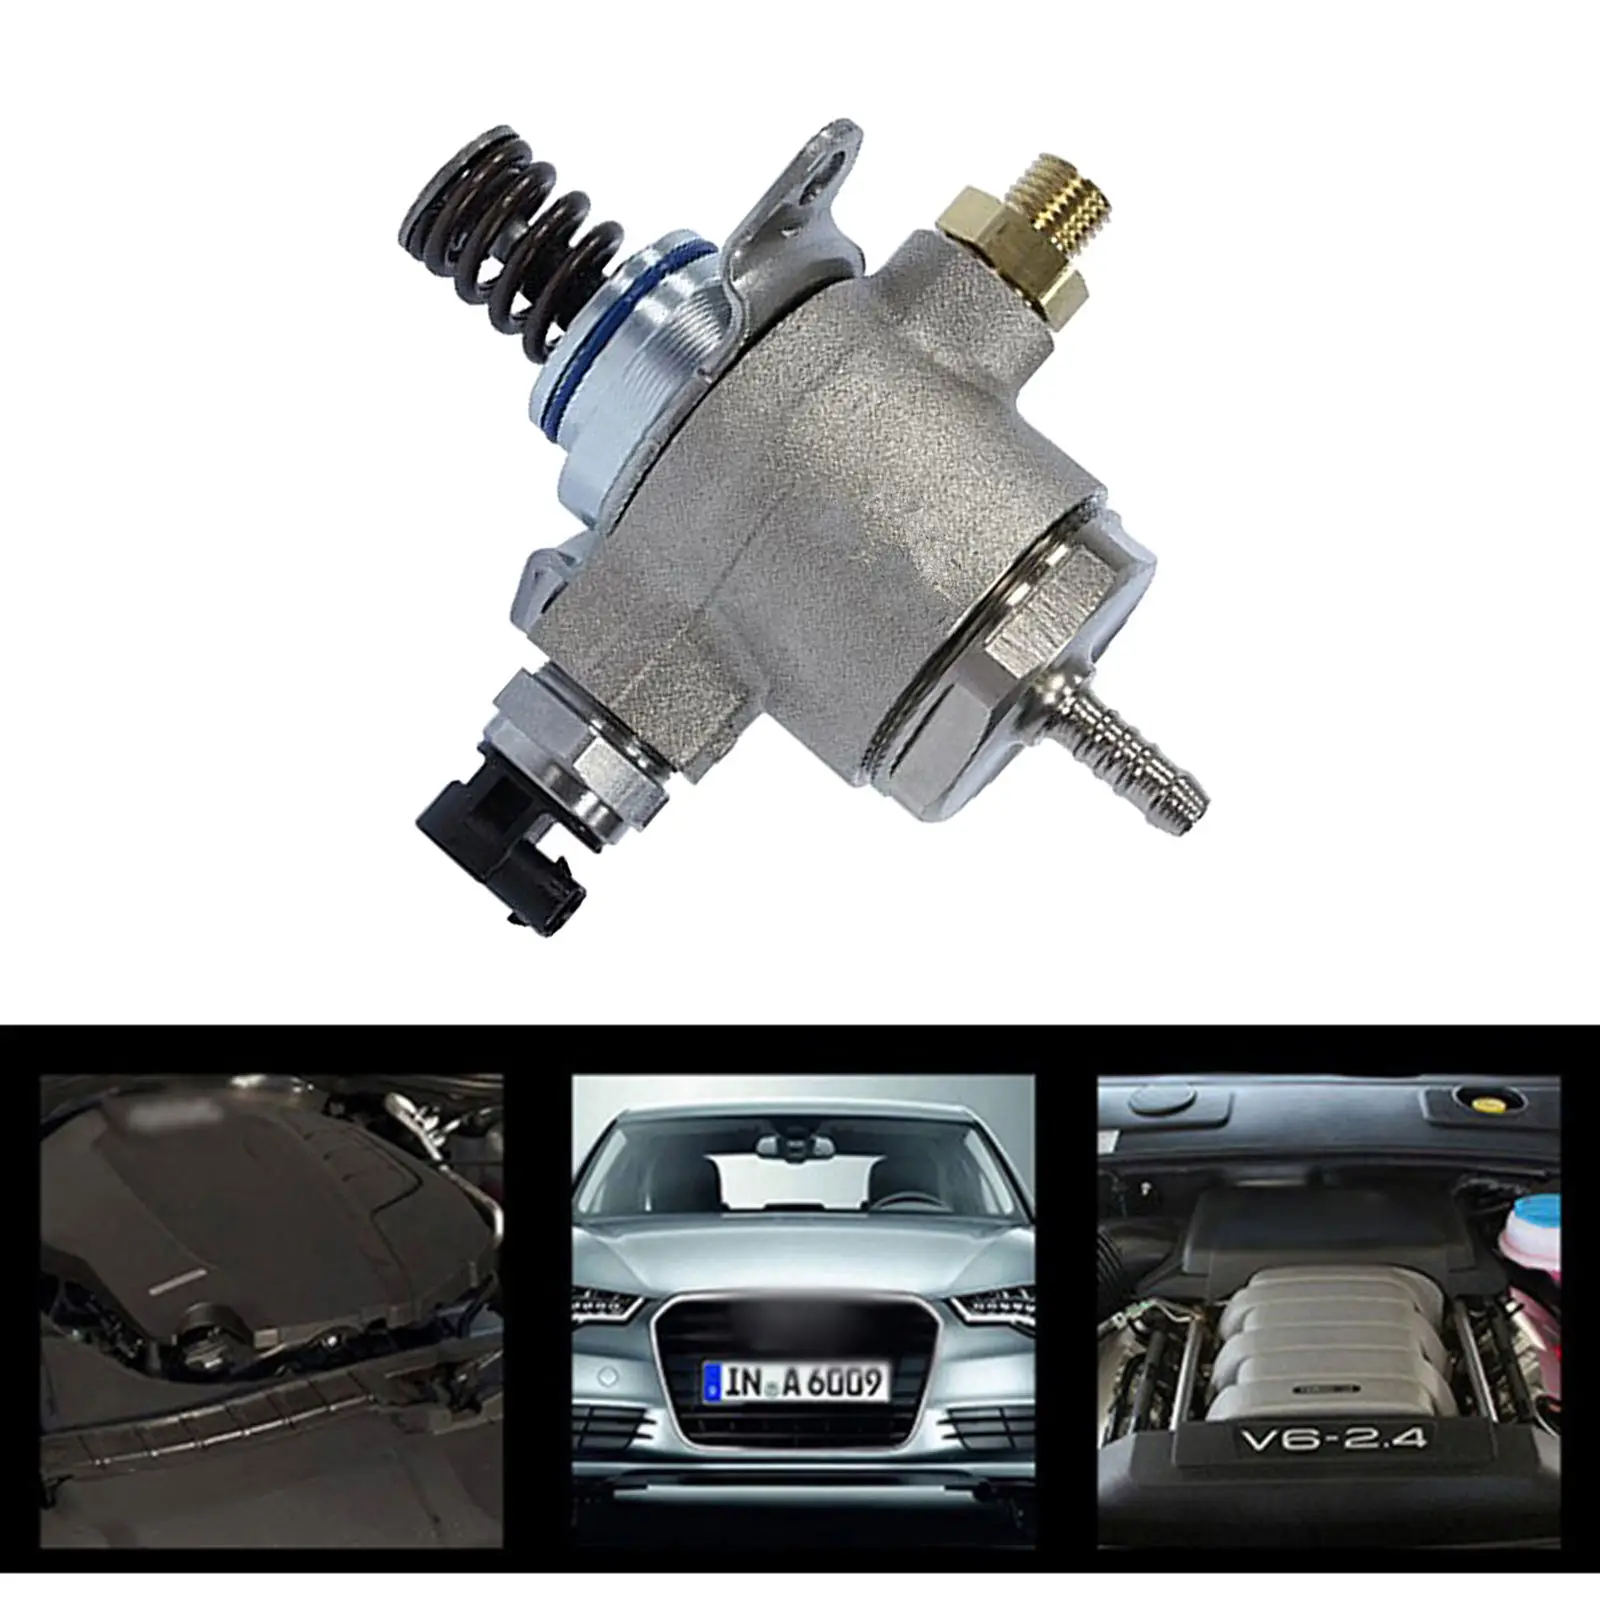 Vehicle High Pressure Fuel Pumps 06J127025L for Audi A4, Easy Install